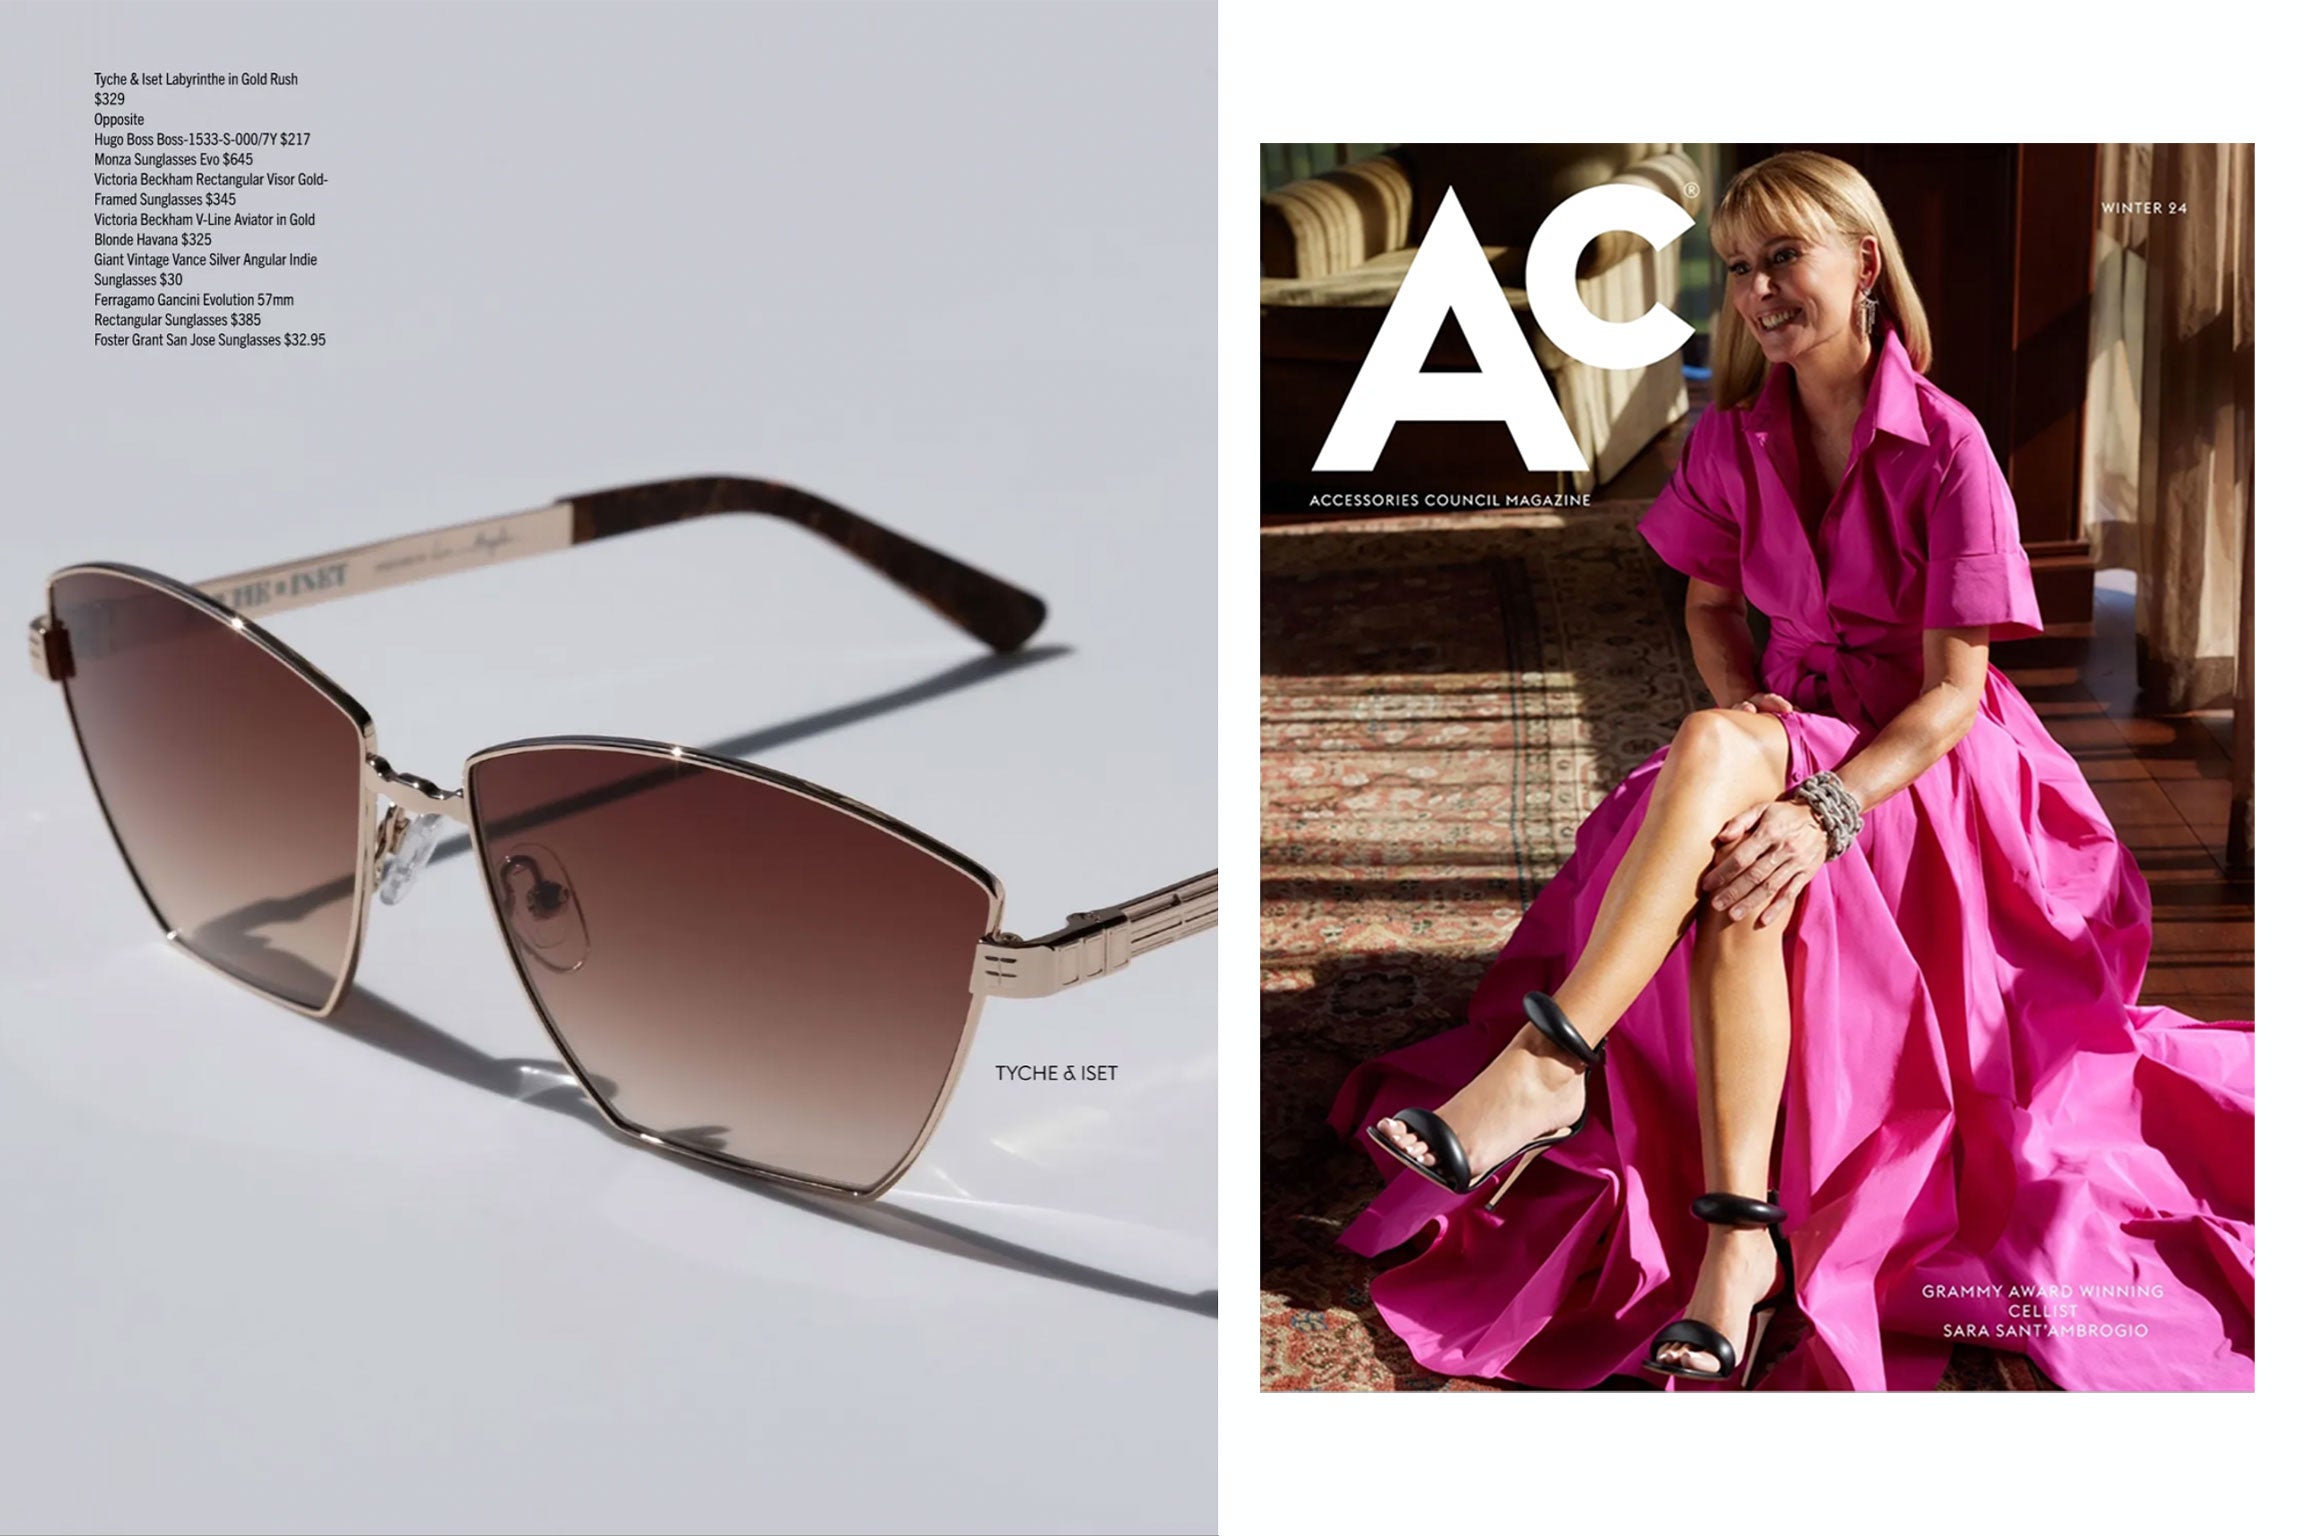 Accessories Council, AC Magazine, Editorial, Winter Fashion Accessories, Wire Frame Eyewear Trends, Optical, Metal Sunglasses, Woman Owned Business